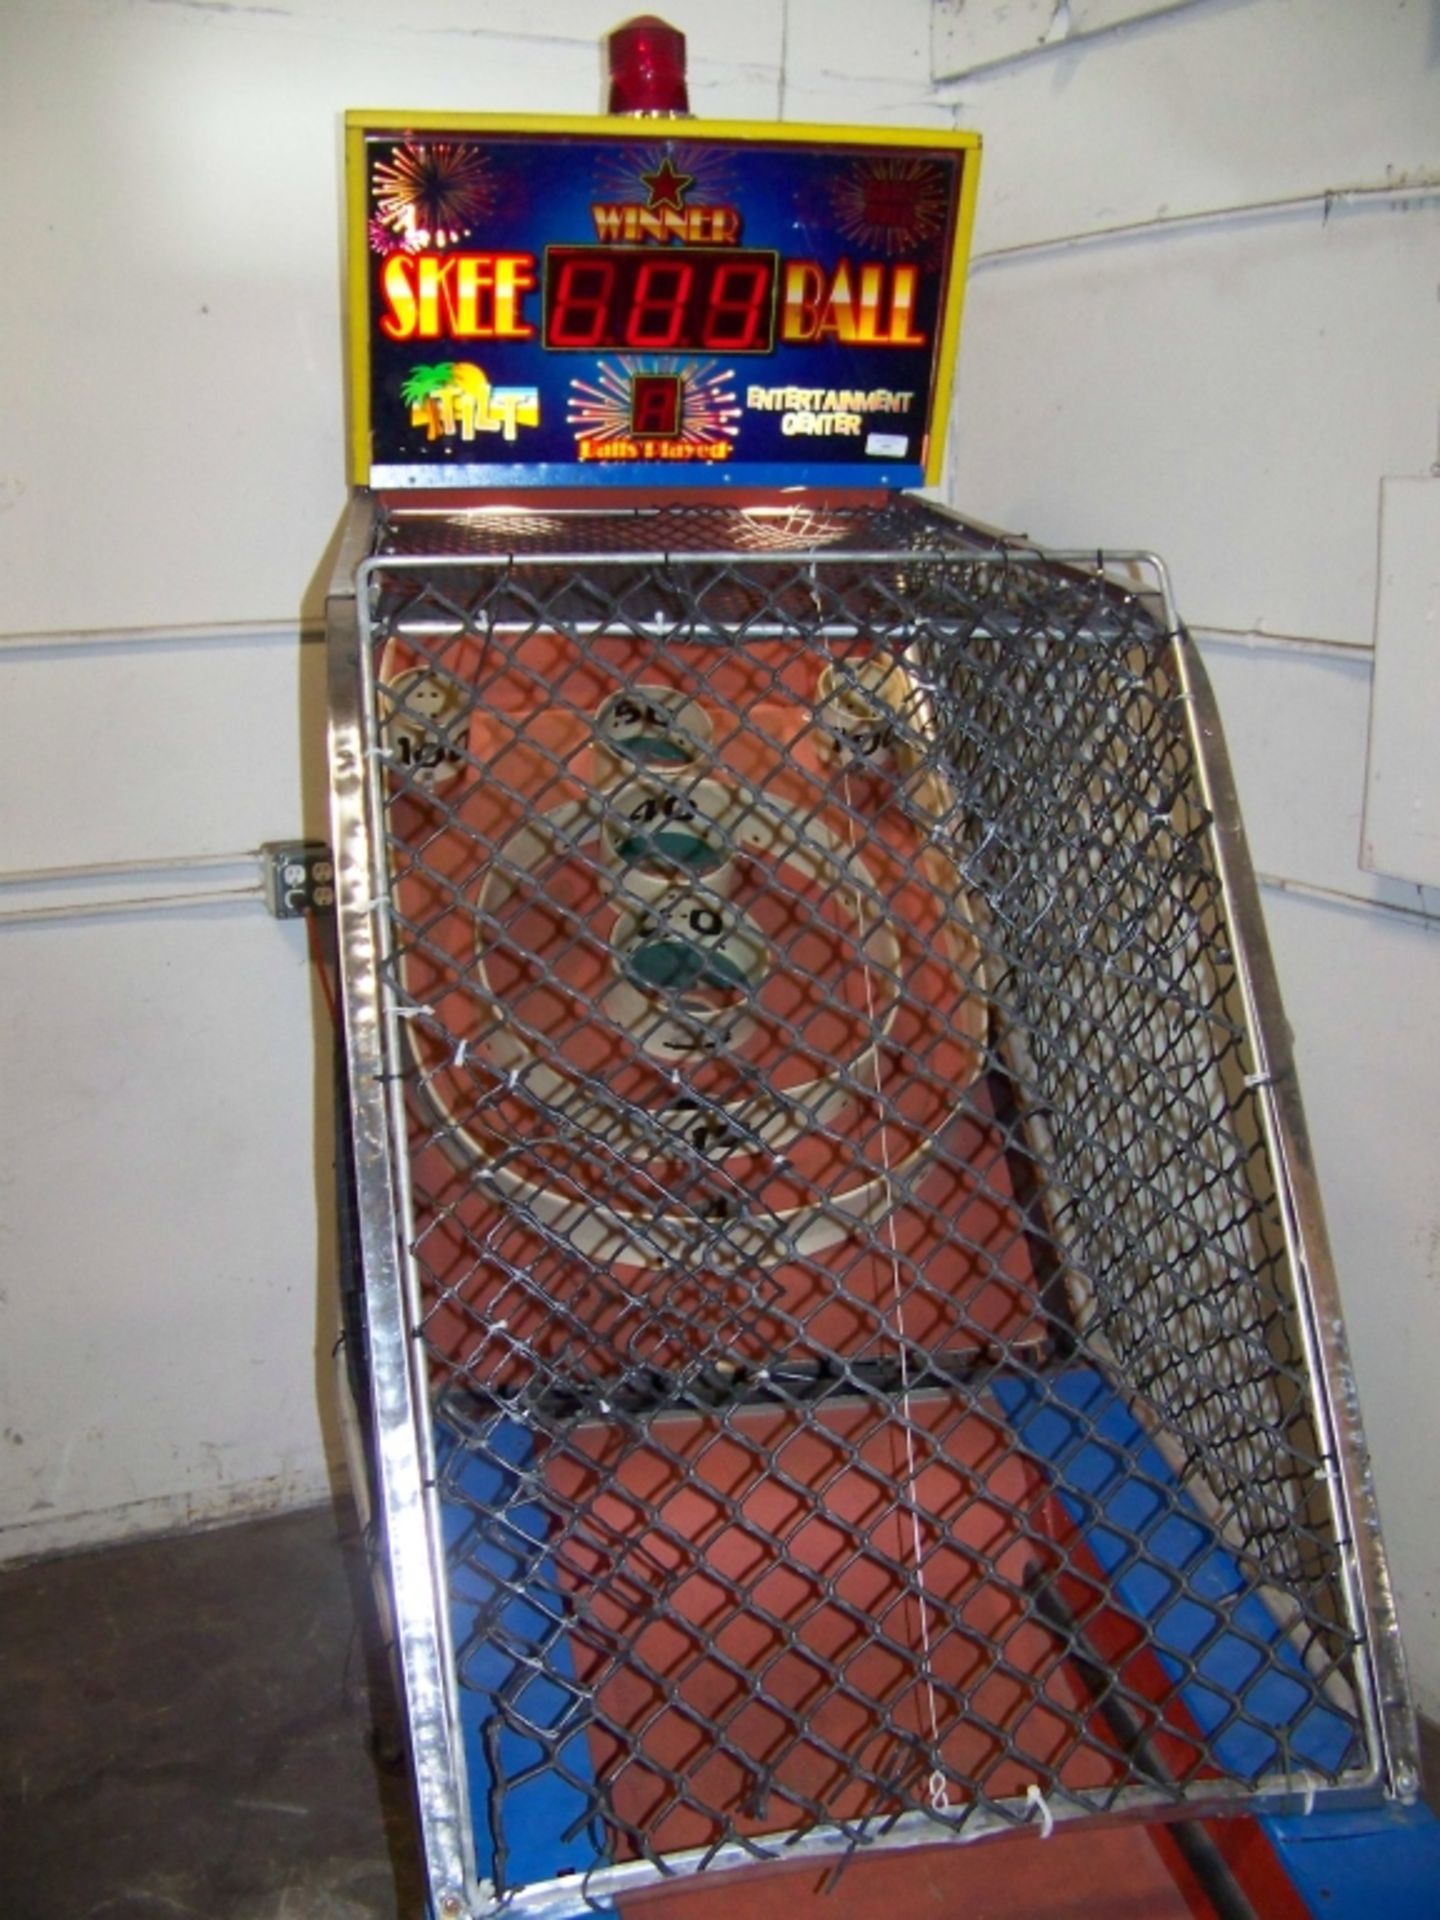 SKEEBALL ALLEY ROLLER MACHINE 13' LANE COMPLETE Item is in used condition. Evidence of wear and - Image 3 of 5